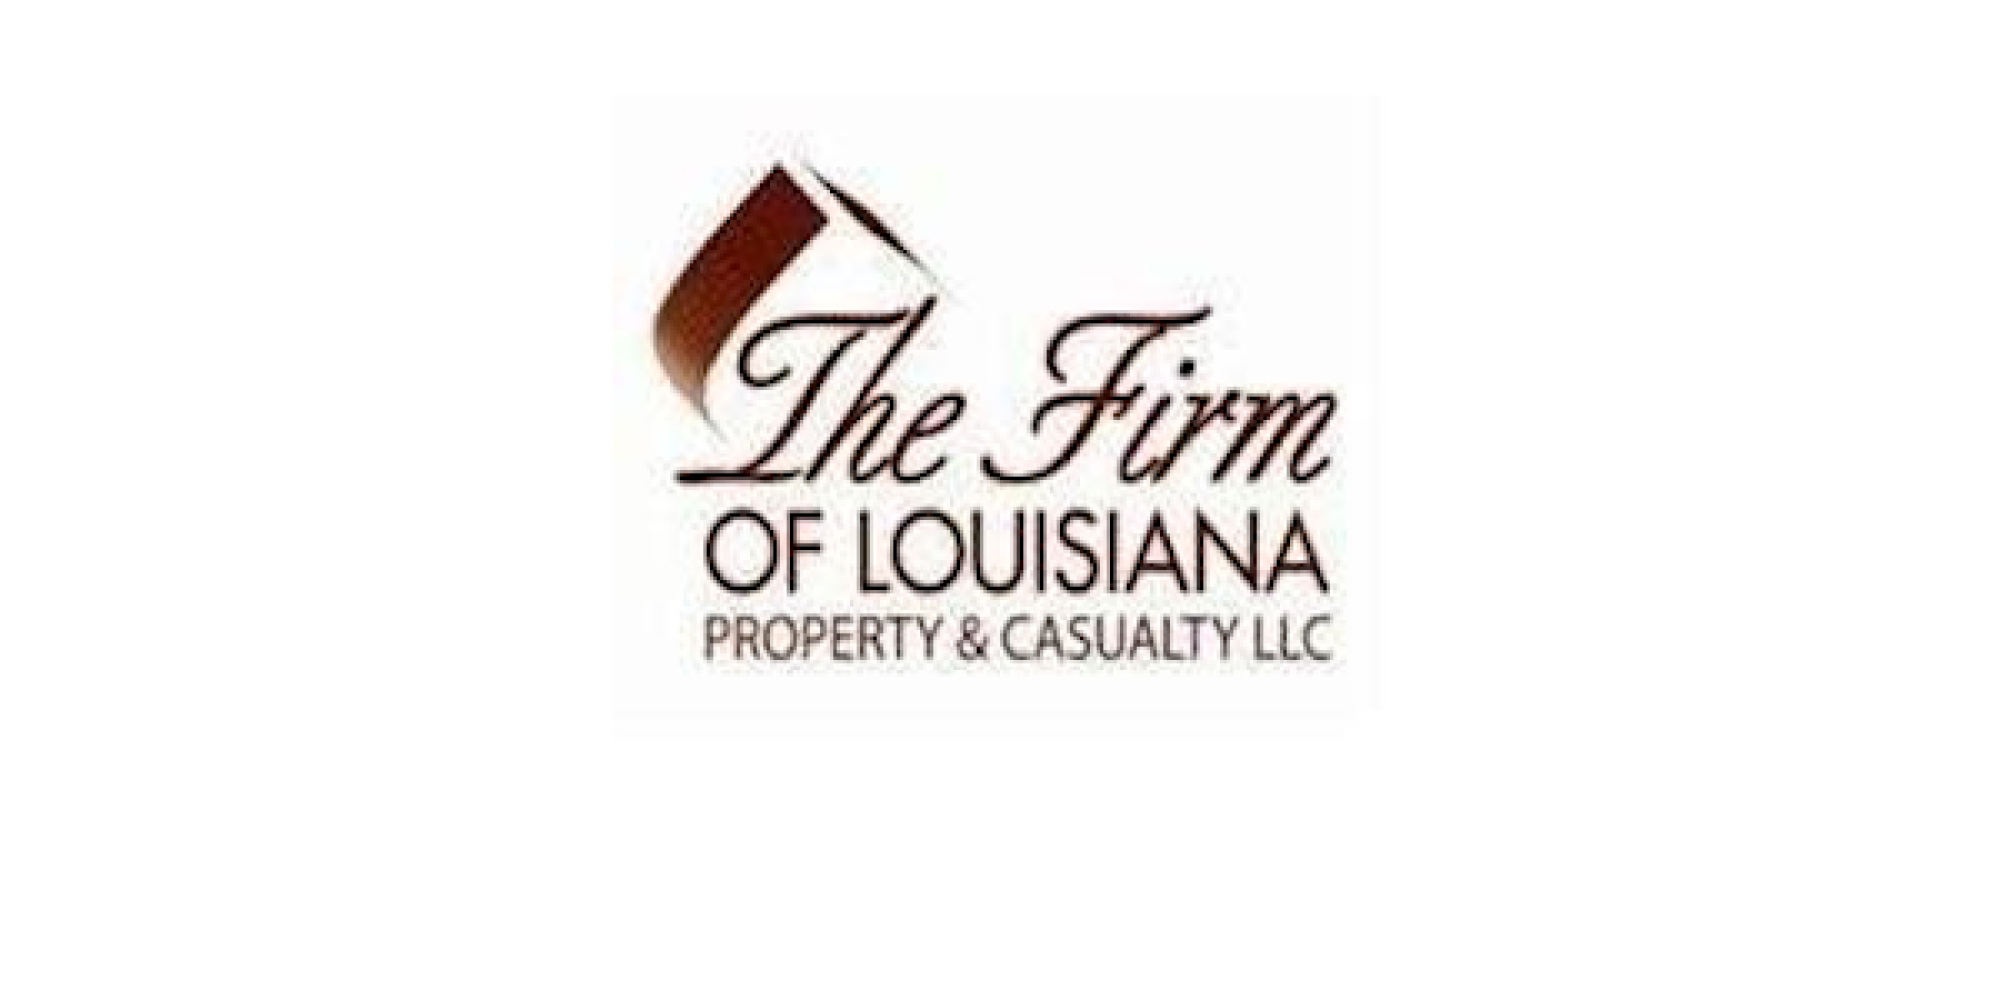 About Us - The Firm Of Louisiana Property & Casualty, LLC